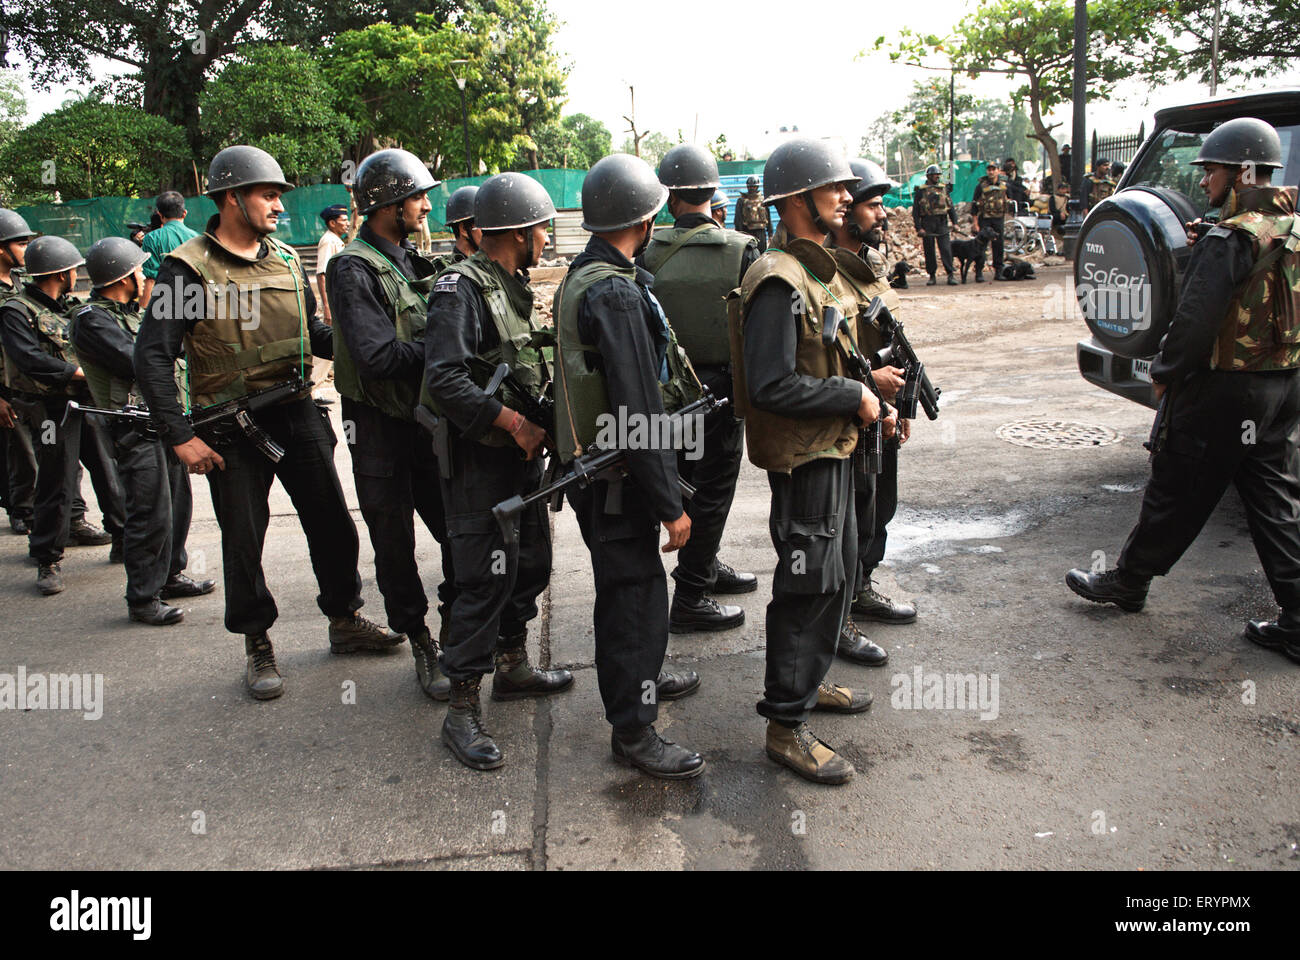 national-security-guard-nsg-commandos-with-gun-after-terrorist-attack-ERYPMX.jpg